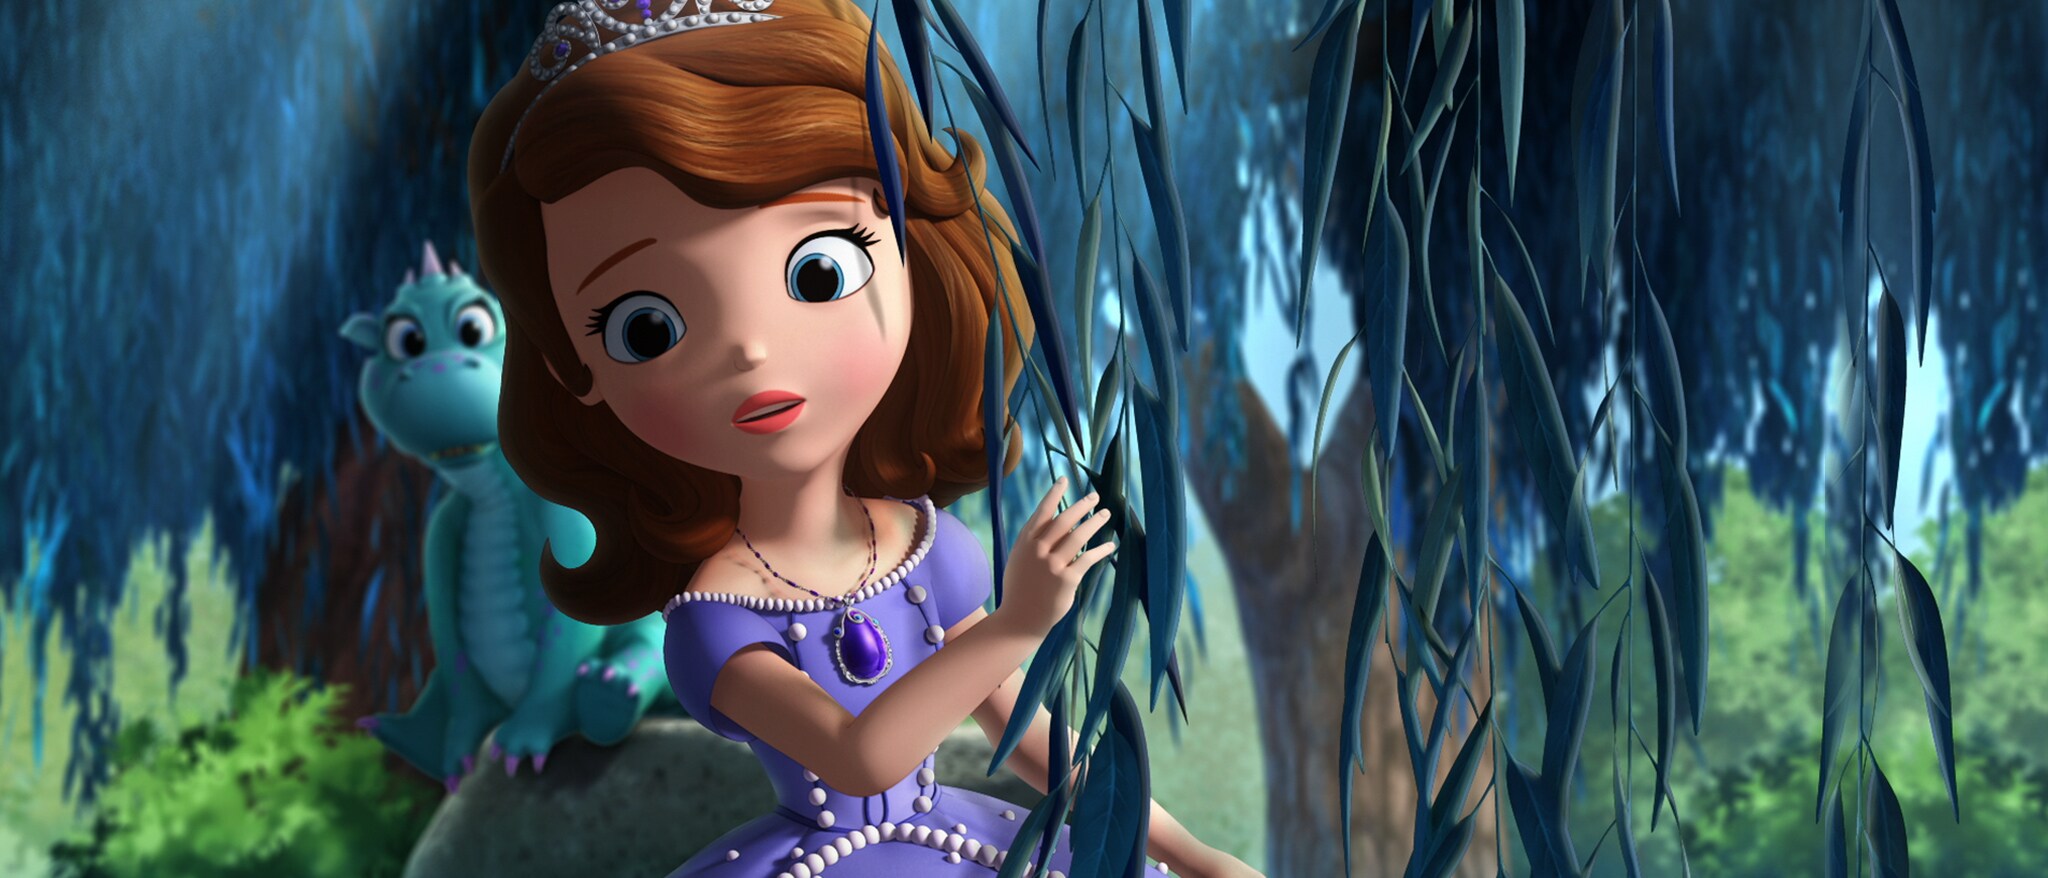 Sofia the First: The Floating Palace Hero